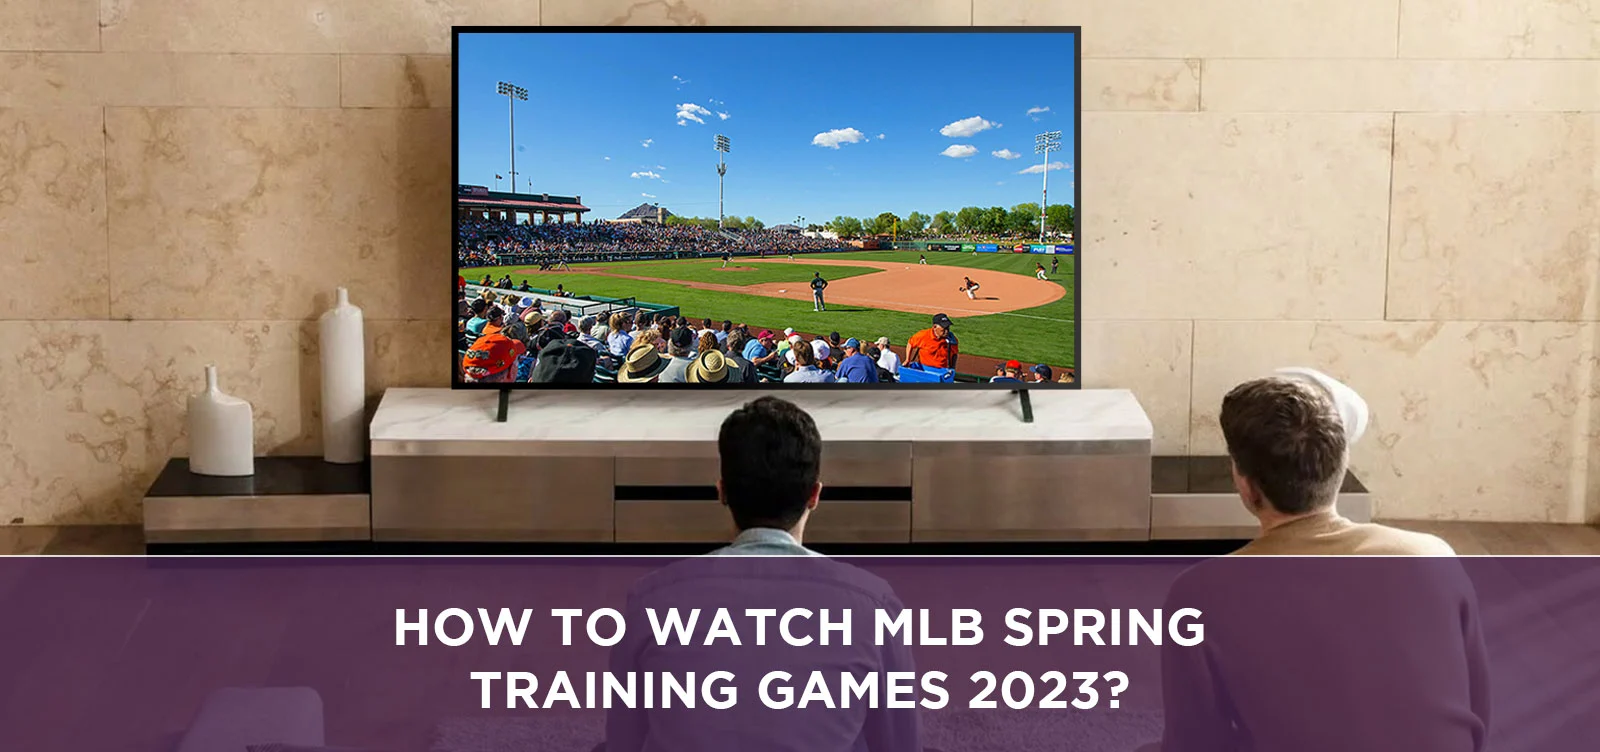 How to watch MLB Spring Training Games 2023?